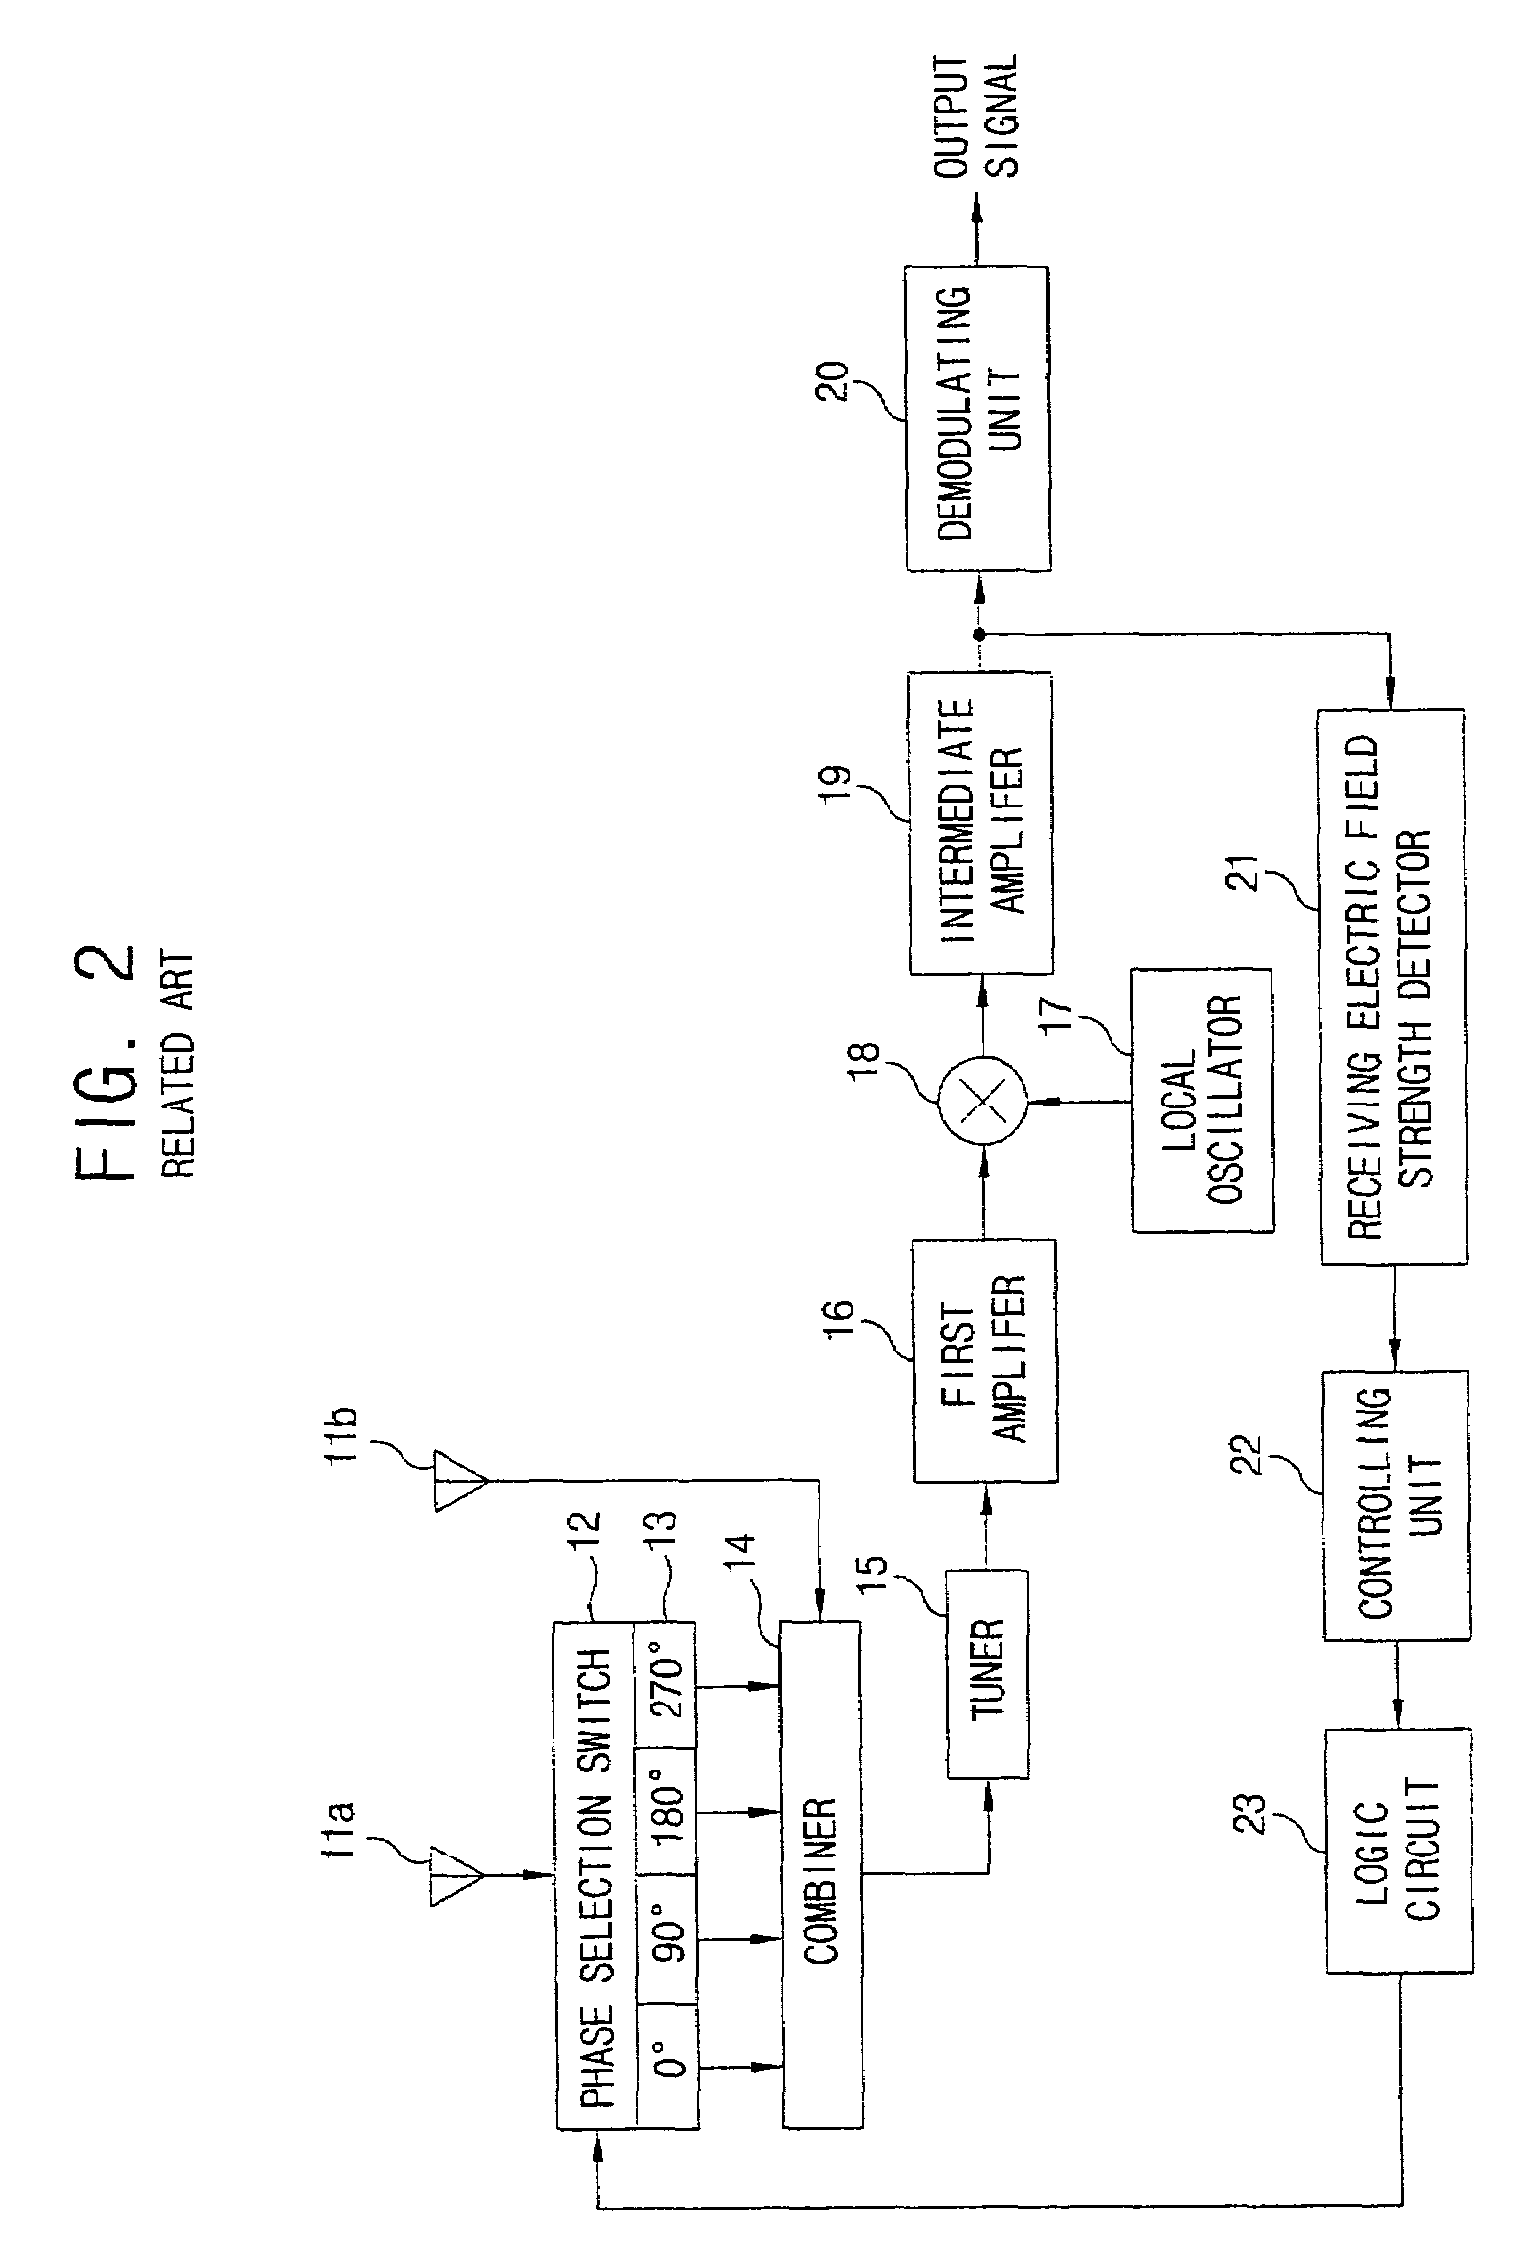 Receiving diversity apparatus and method of mobile station for high data rate type mobile communication system